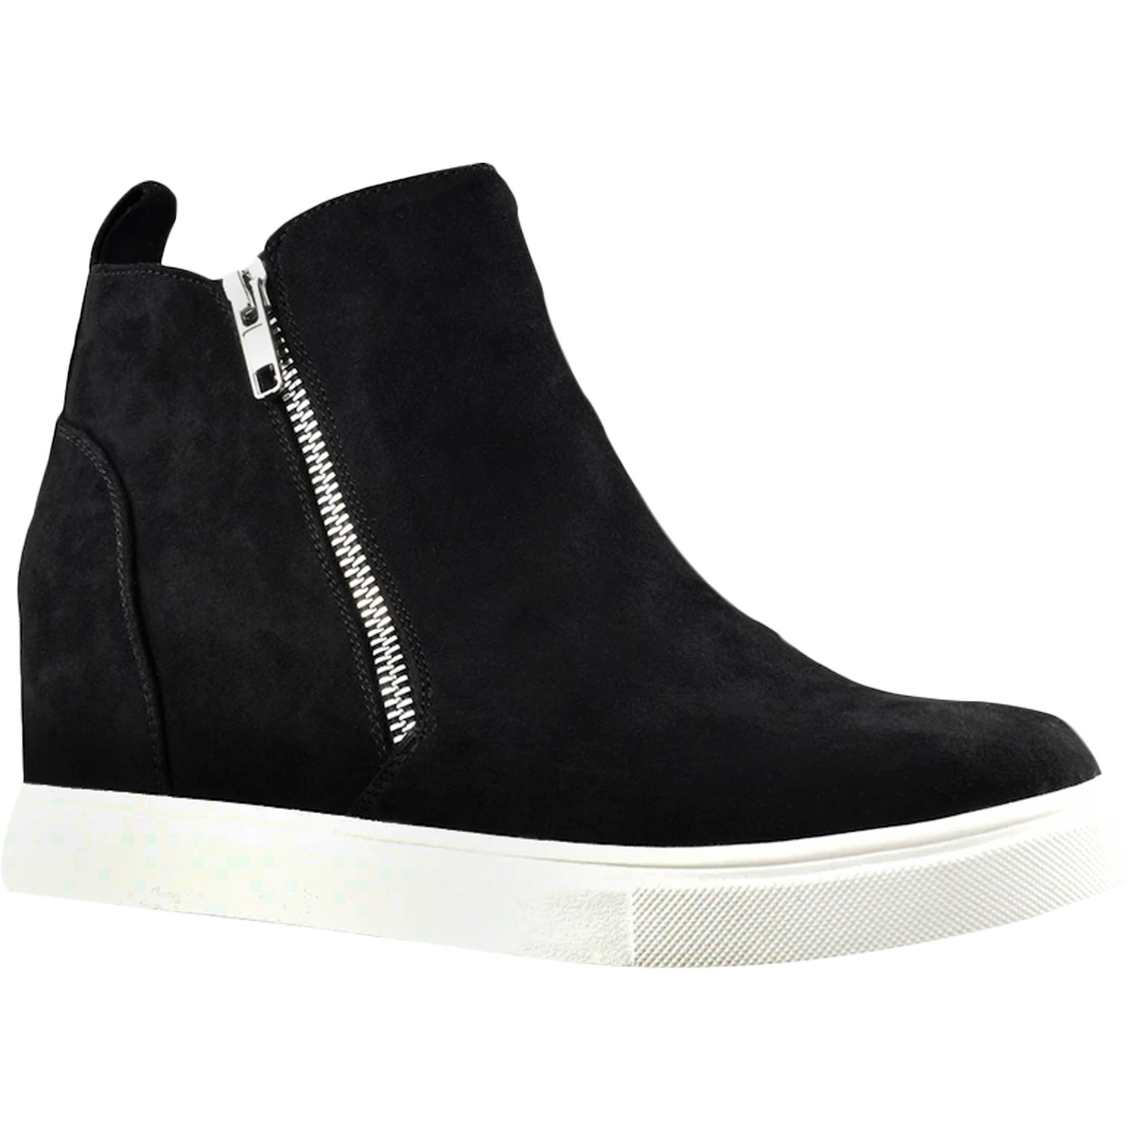 Madden Girl Piperr Hi Top Sneaker | Sneakers | Shoes | Shop The Exchange